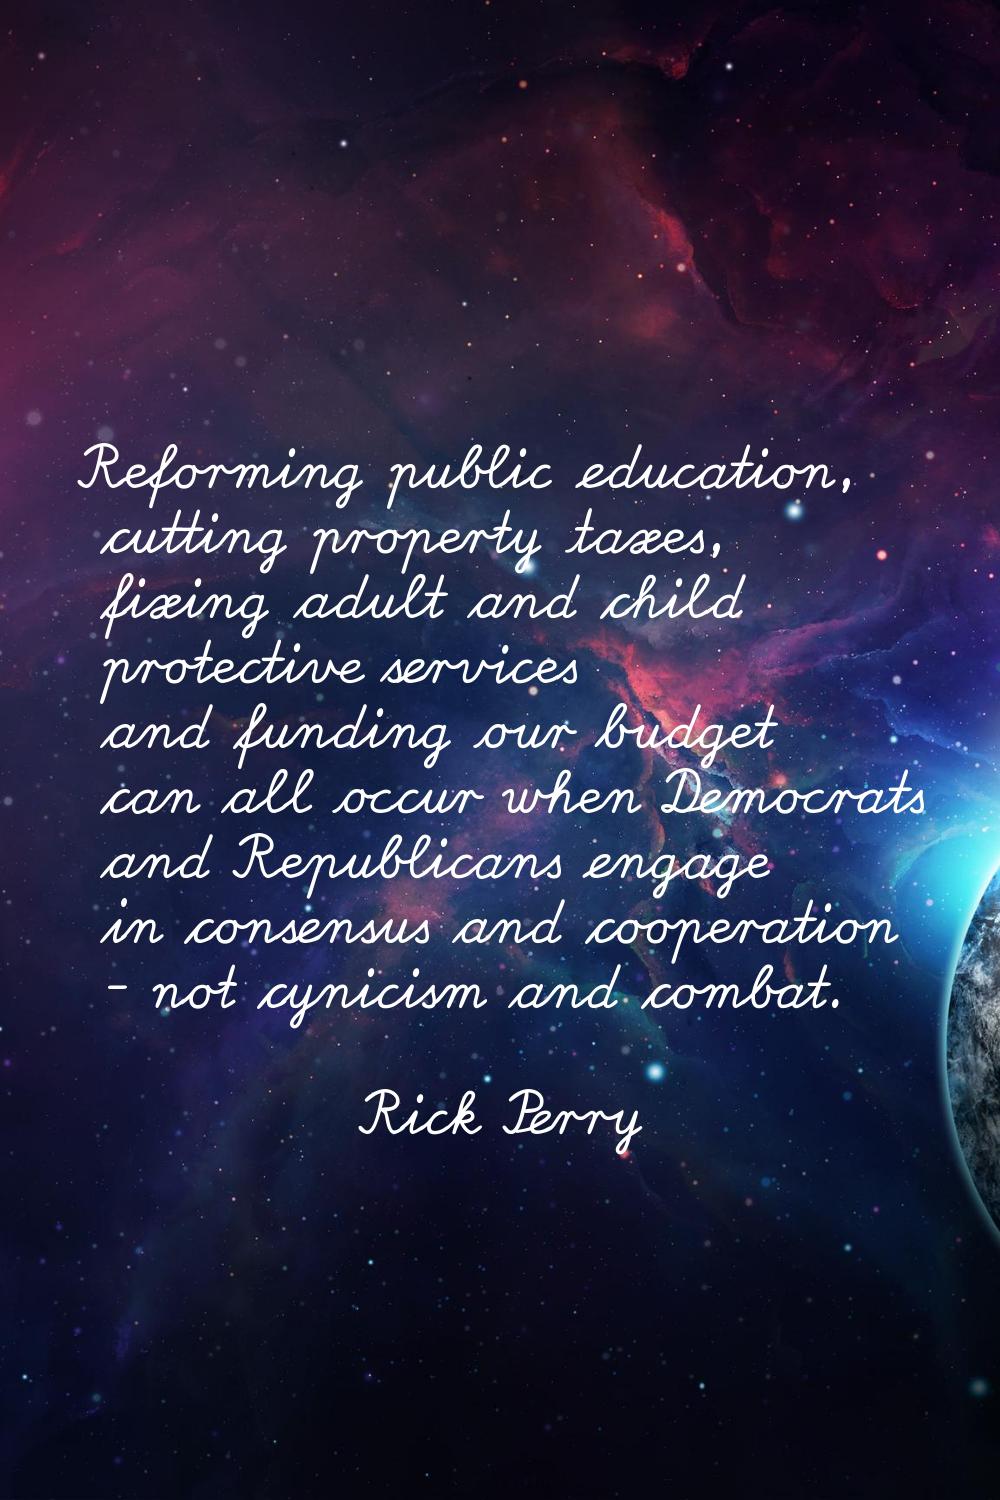 Reforming public education, cutting property taxes, fixing adult and child protective services and 